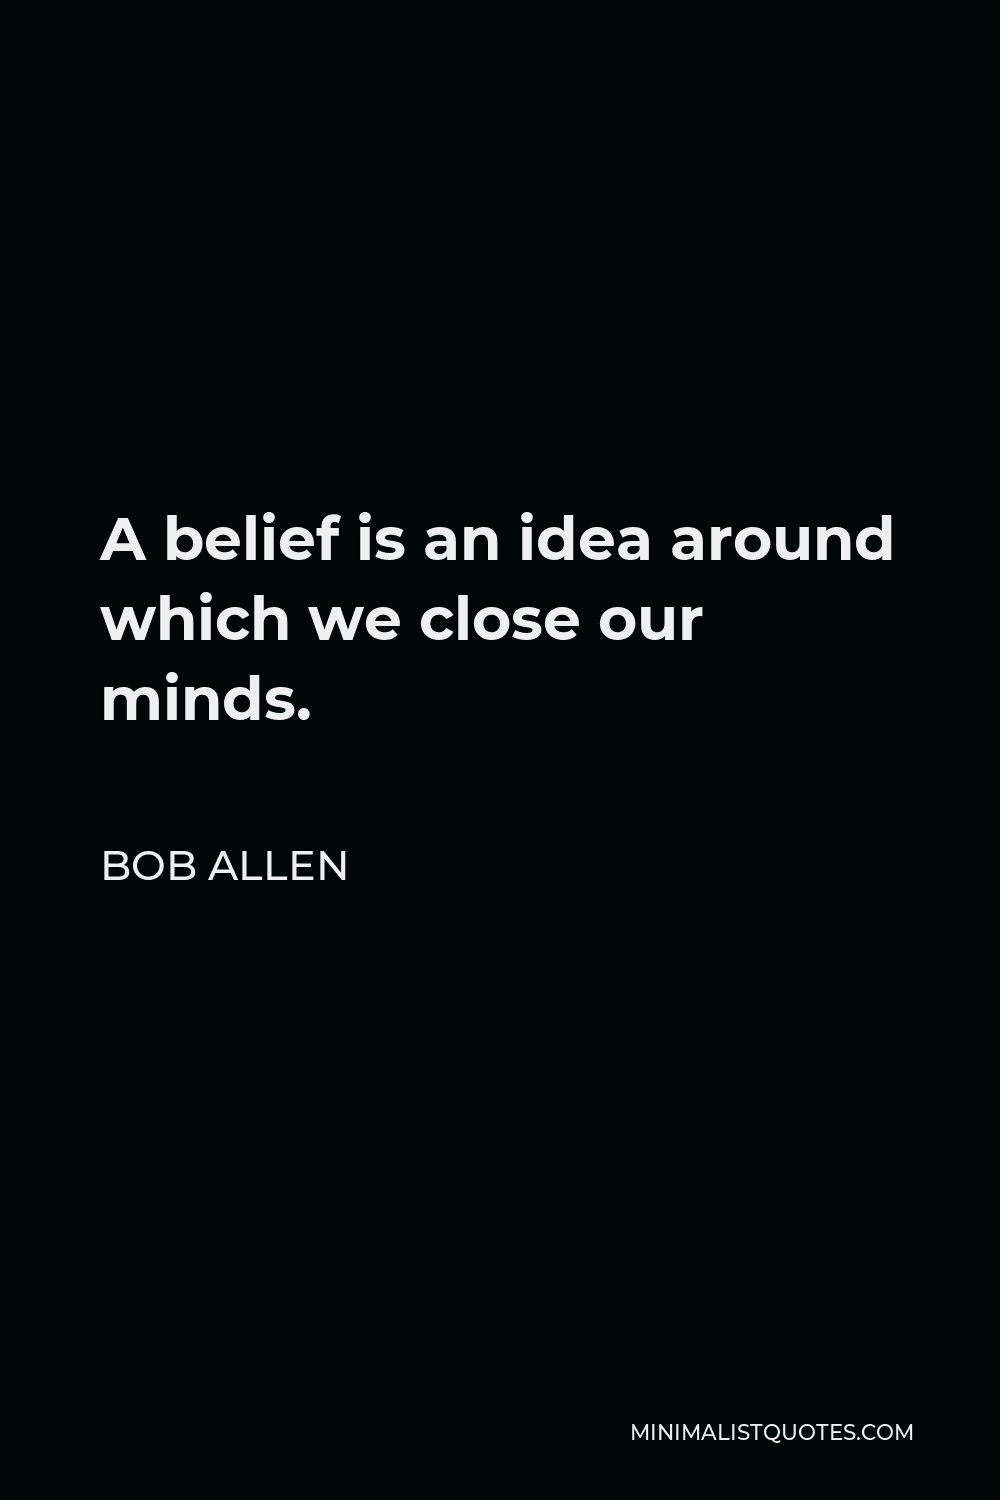 Bob Allen Quote - A belief is an idea around which we close our minds.